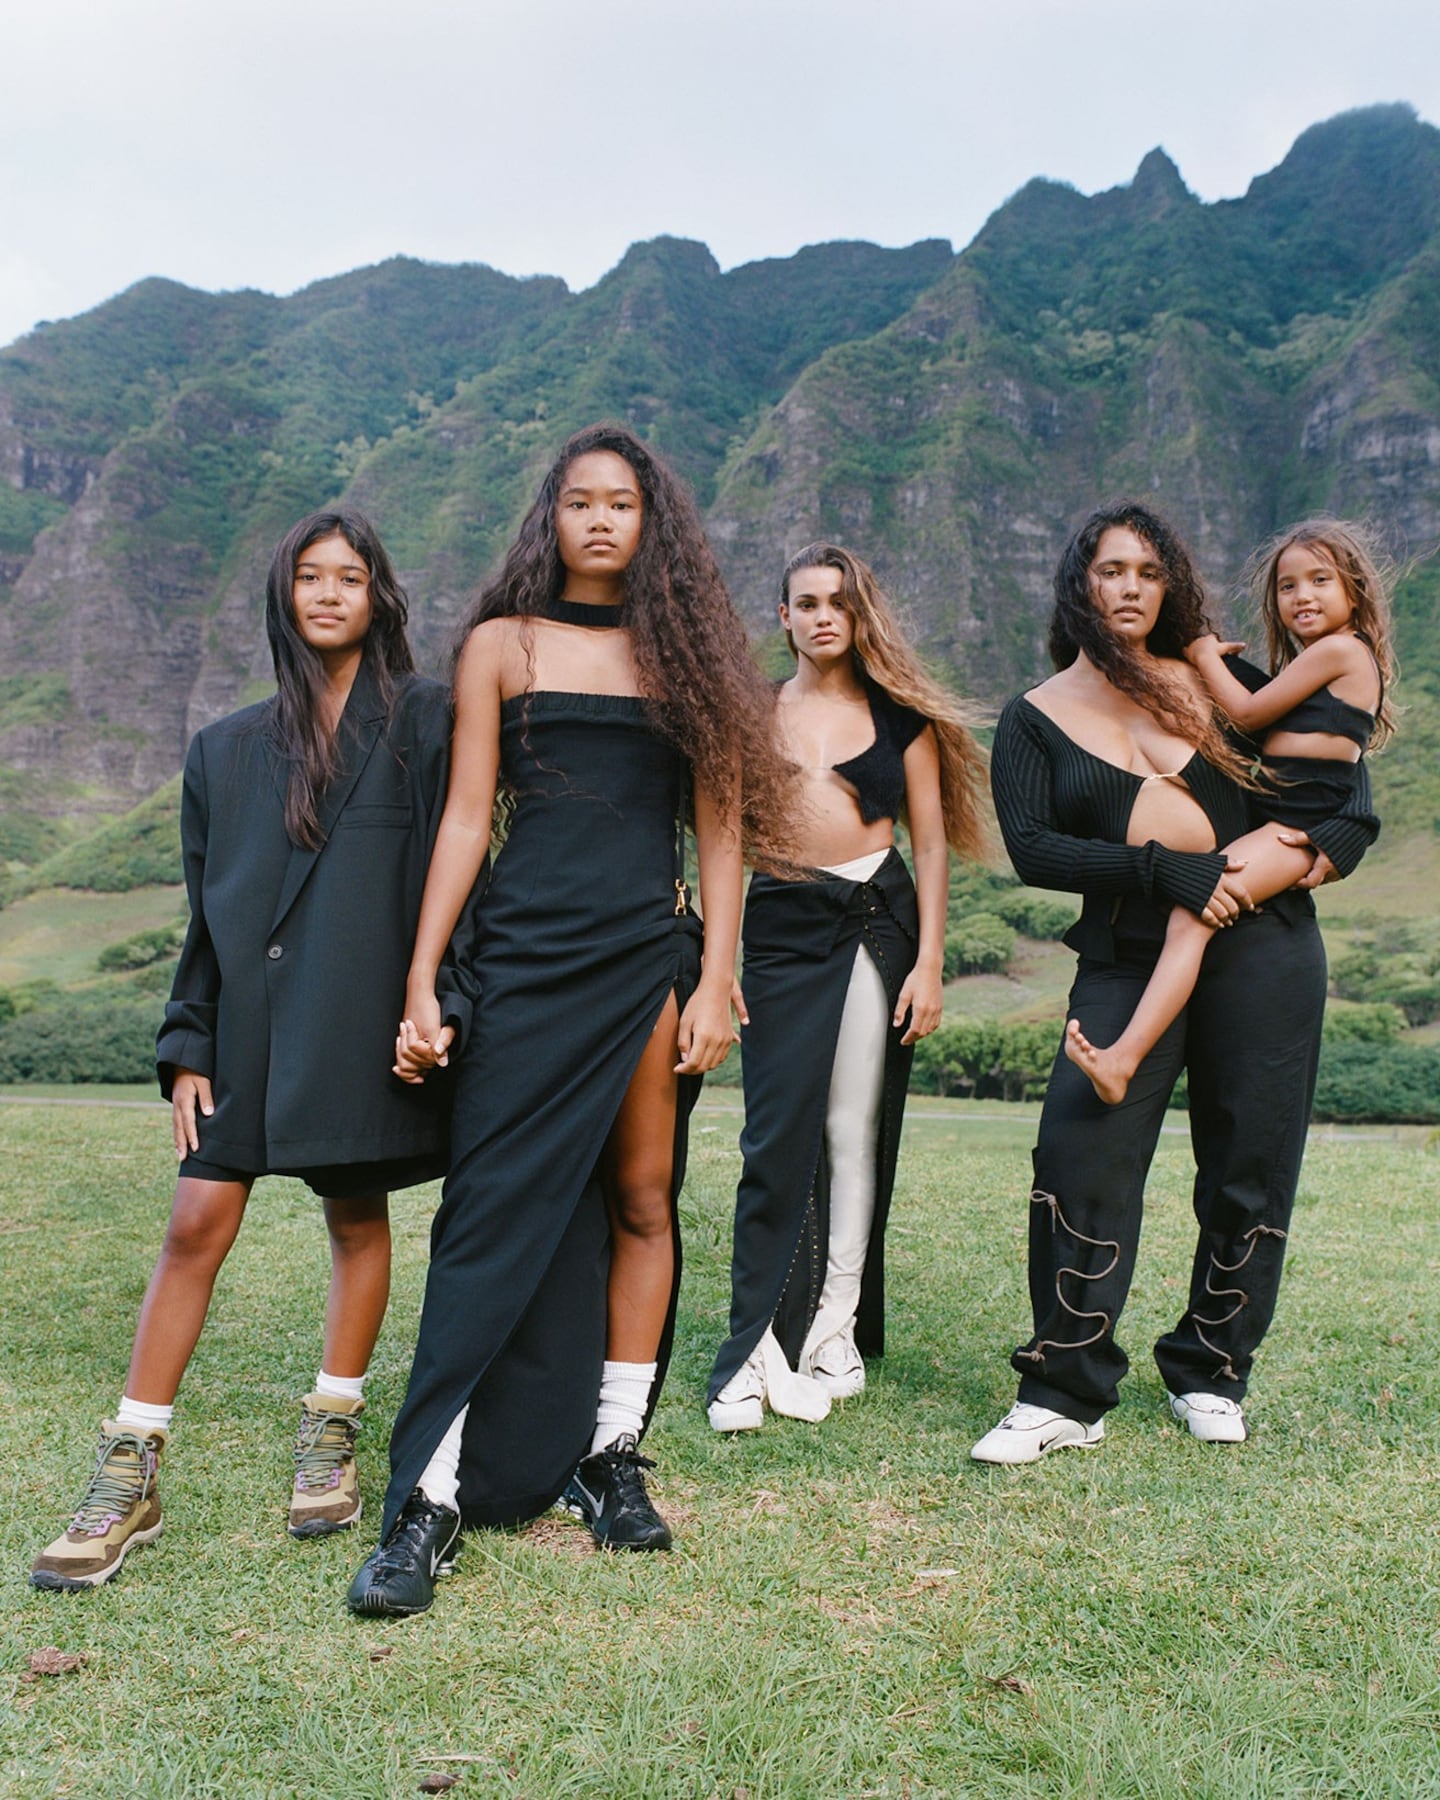 Jacquemus' Autumn/Winter 2021 campaign was shot in Hawaii.